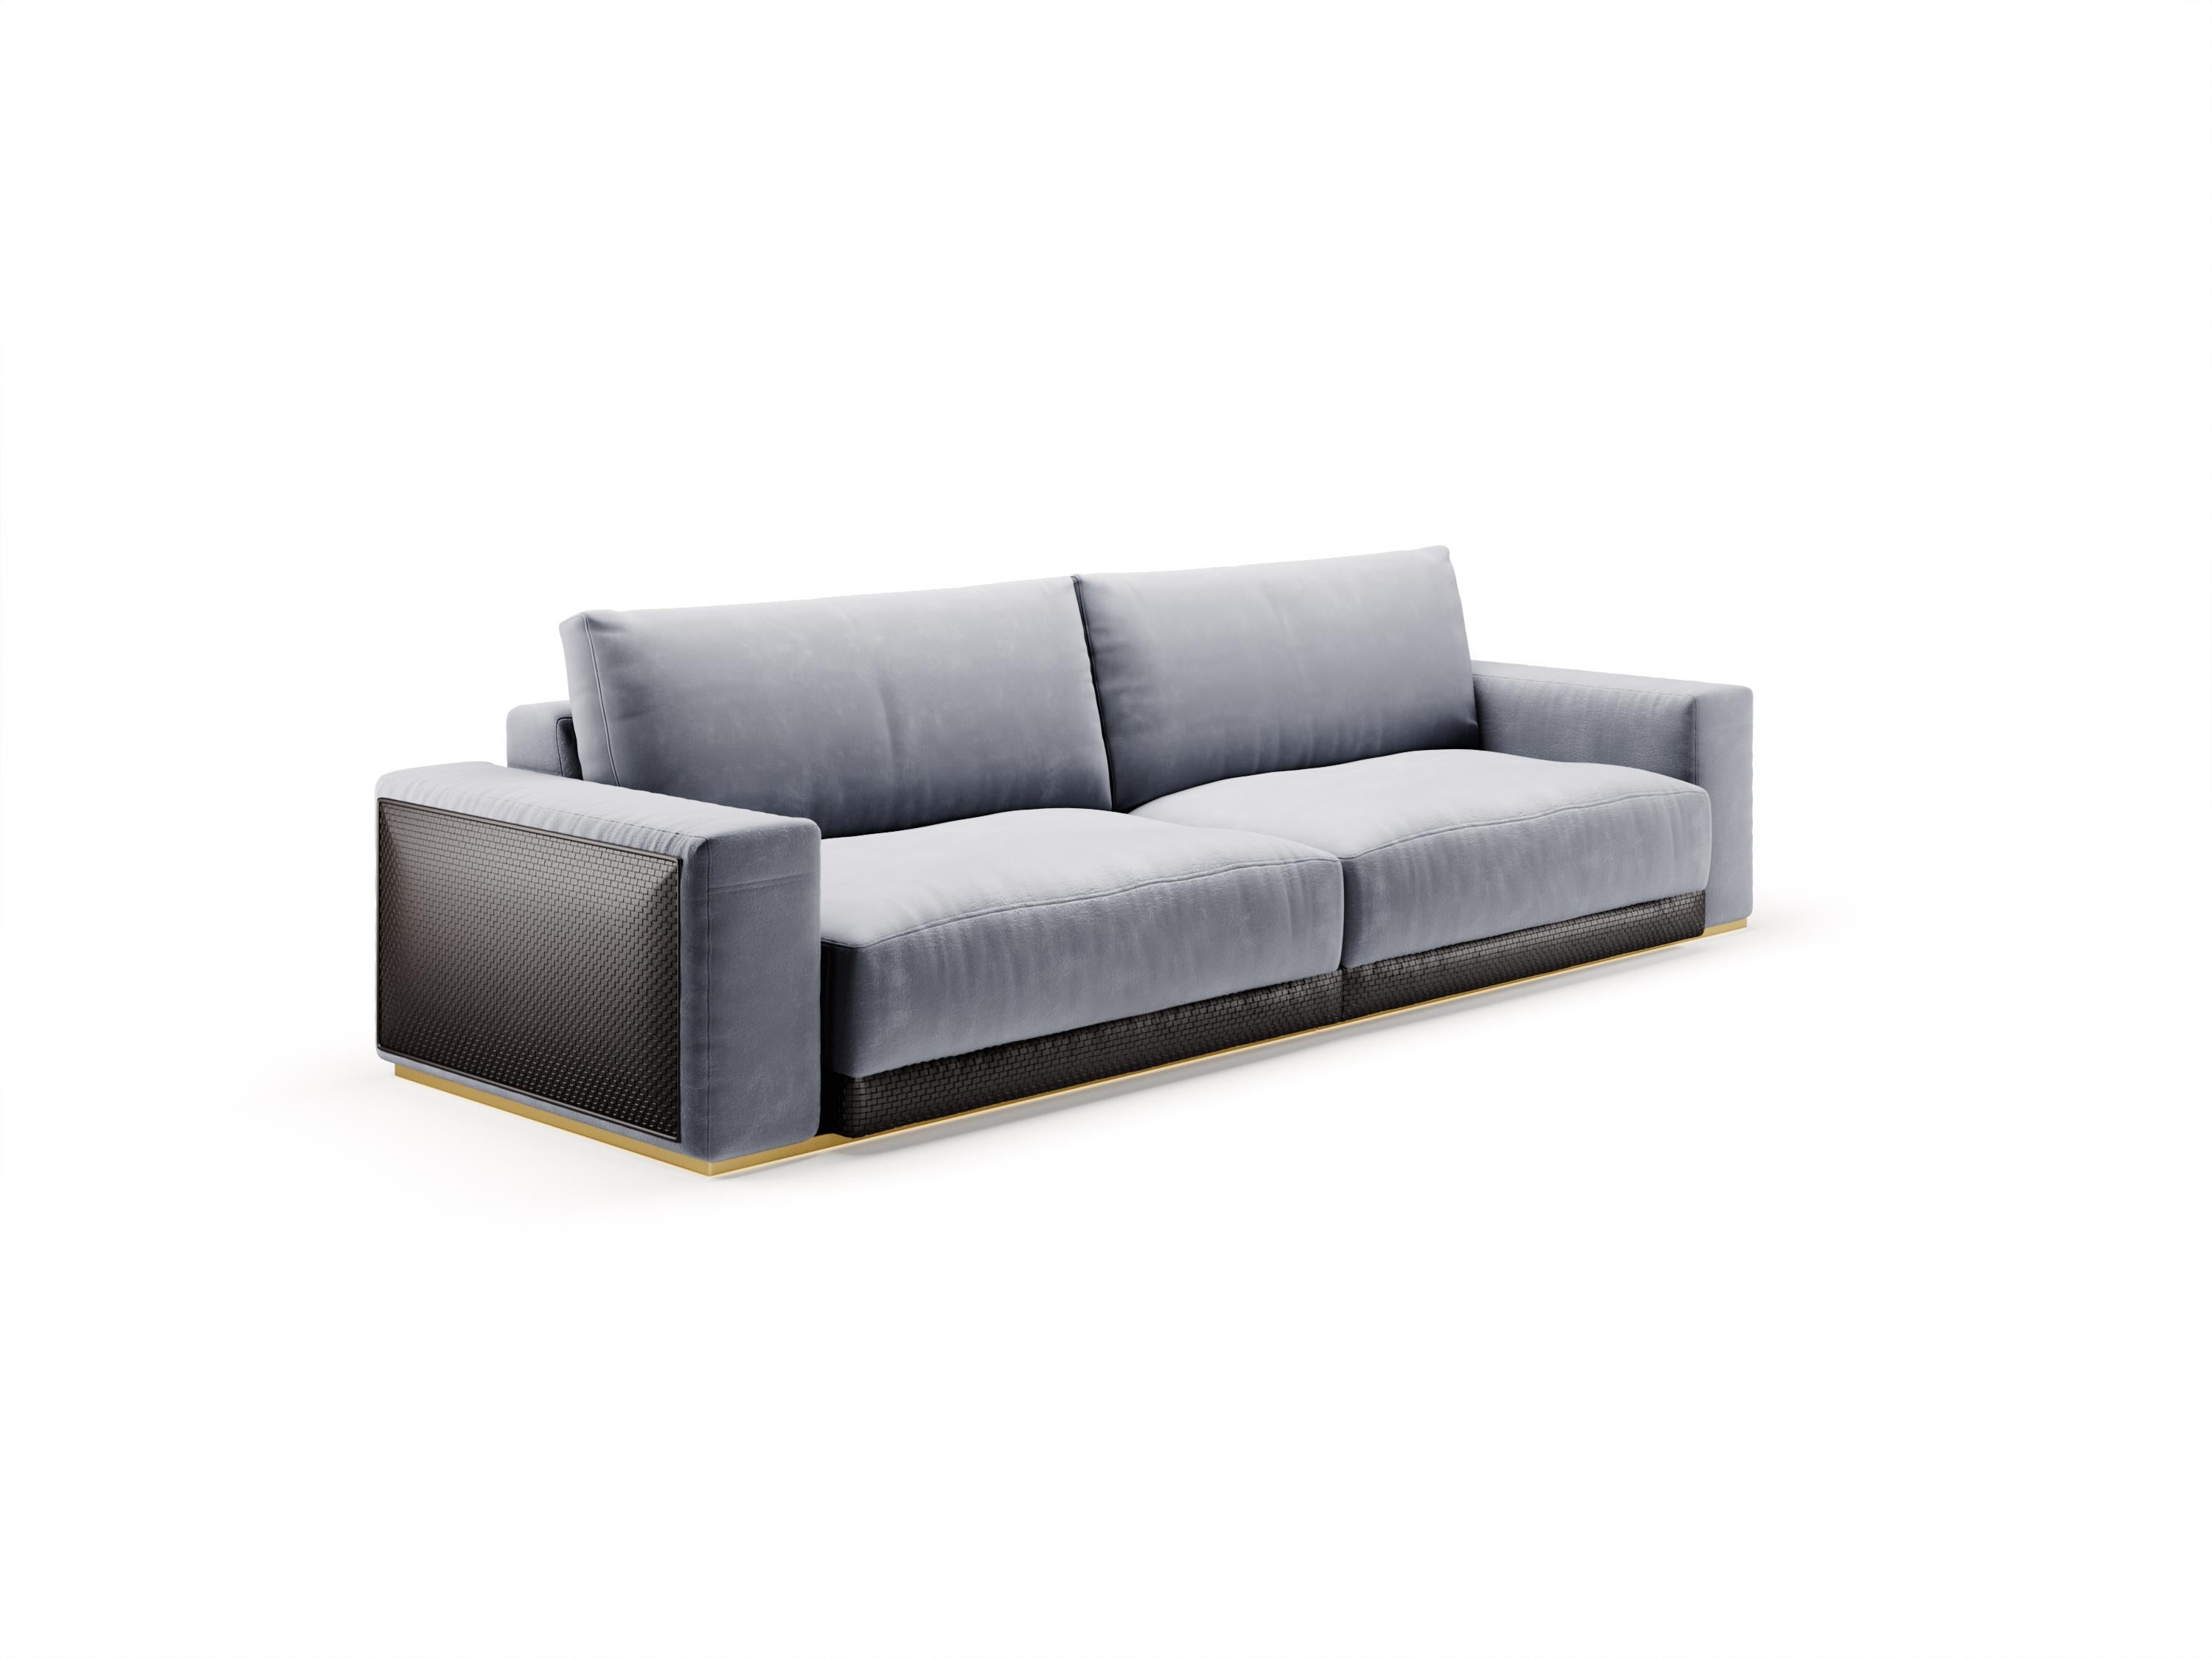 Gaston right or left arm, is an element of modular sofa available in handmade crossed leather on the sides. This element cover comes in a wide range of velvets, leather and nabuk with cannettè details.

The base is covered in polished bright